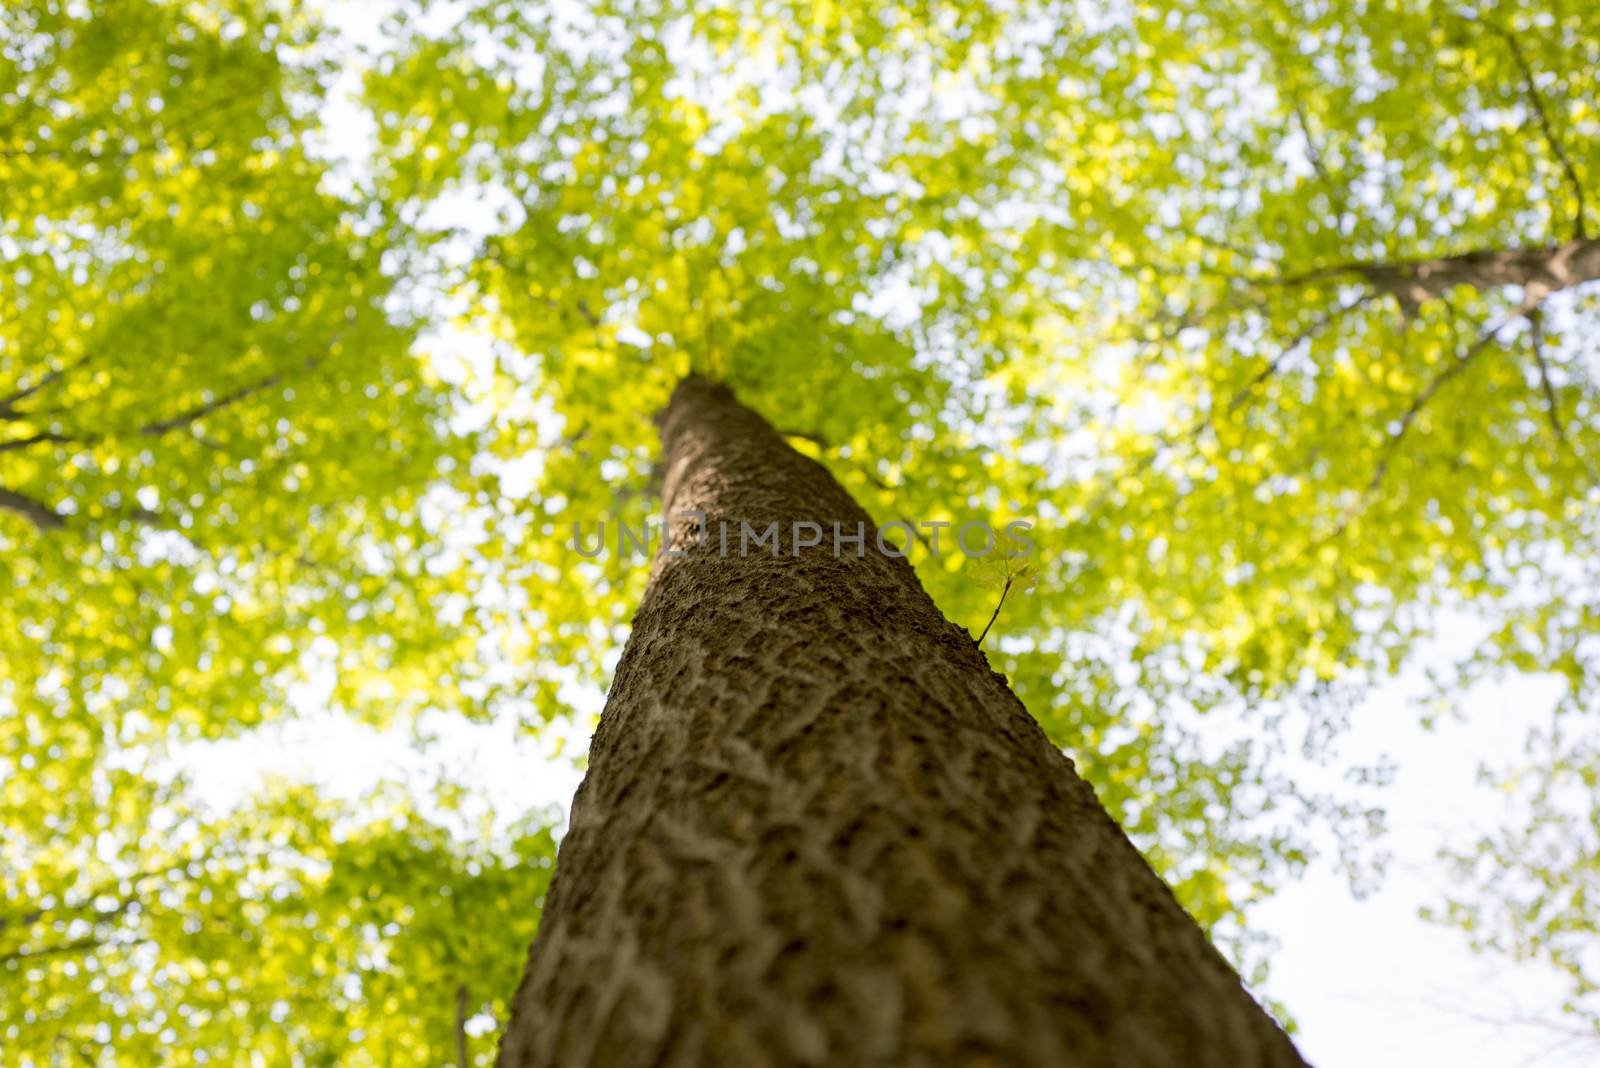 Maple tree trunk and branches POV by rgbspace